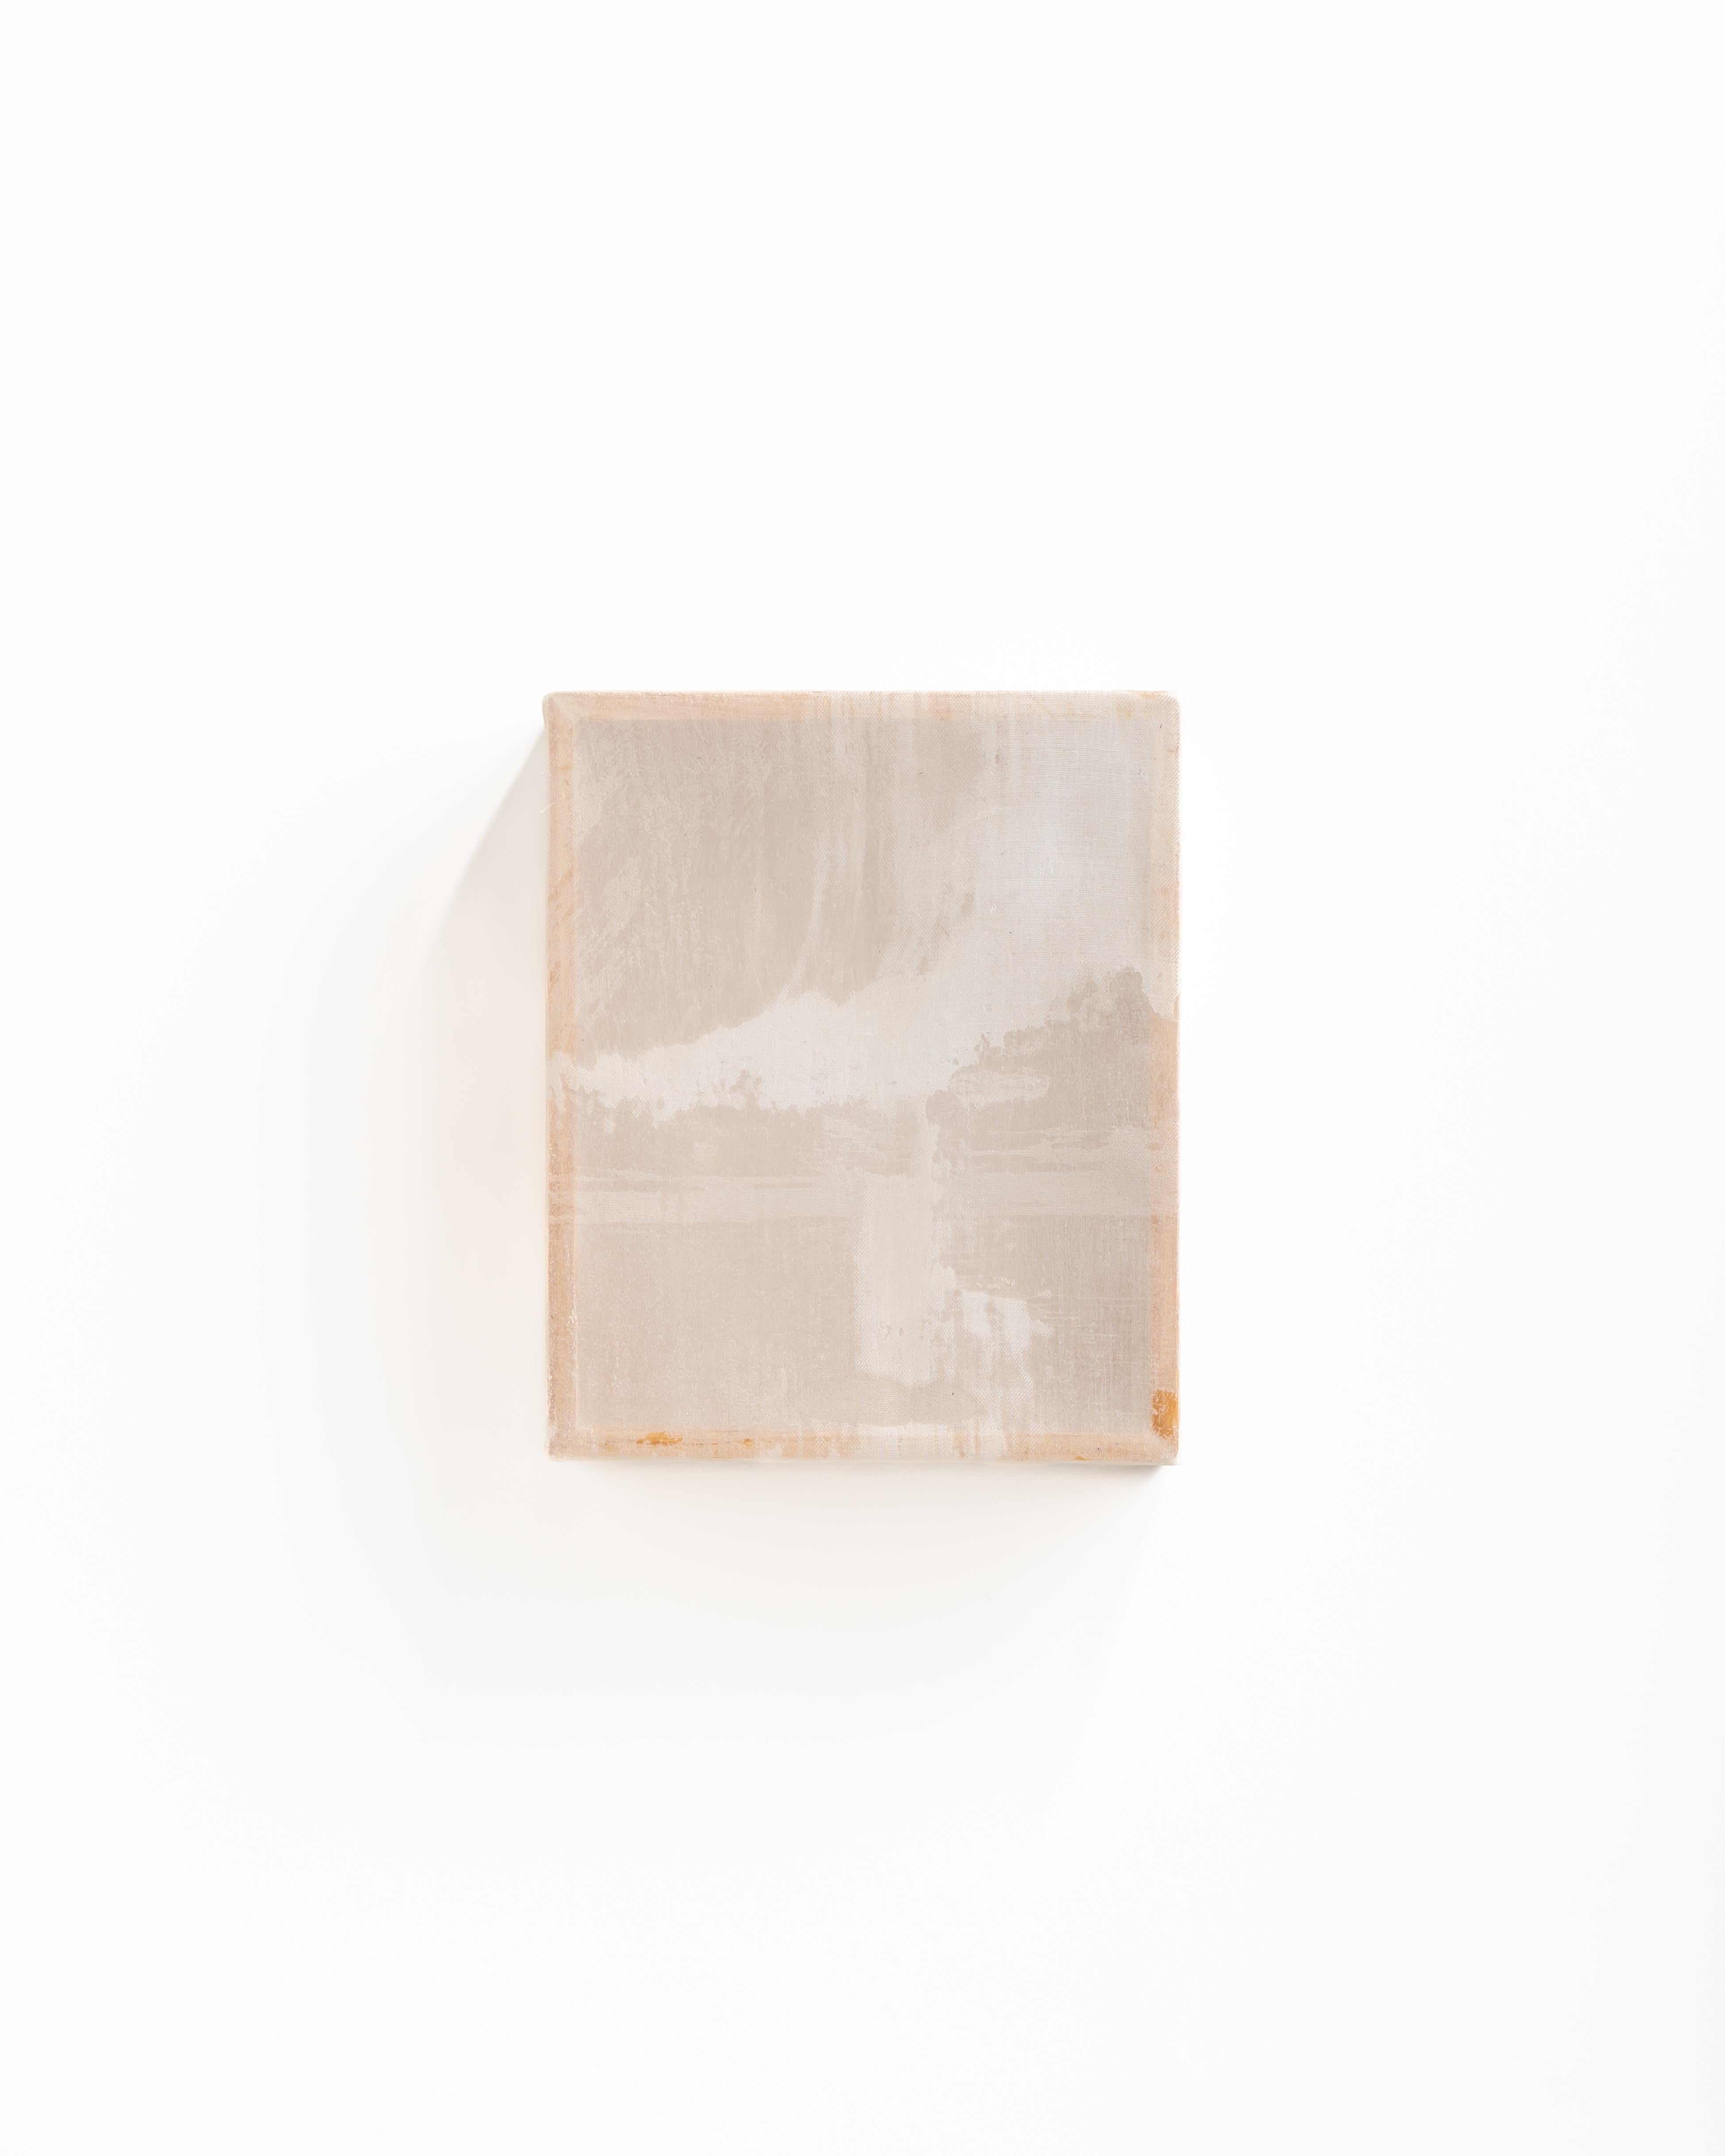 Cristina Loya Domingo Abstract Painting - UNTITLED 0.17 – wax on silk, natural materials, ecologies, minimal/abstract scre